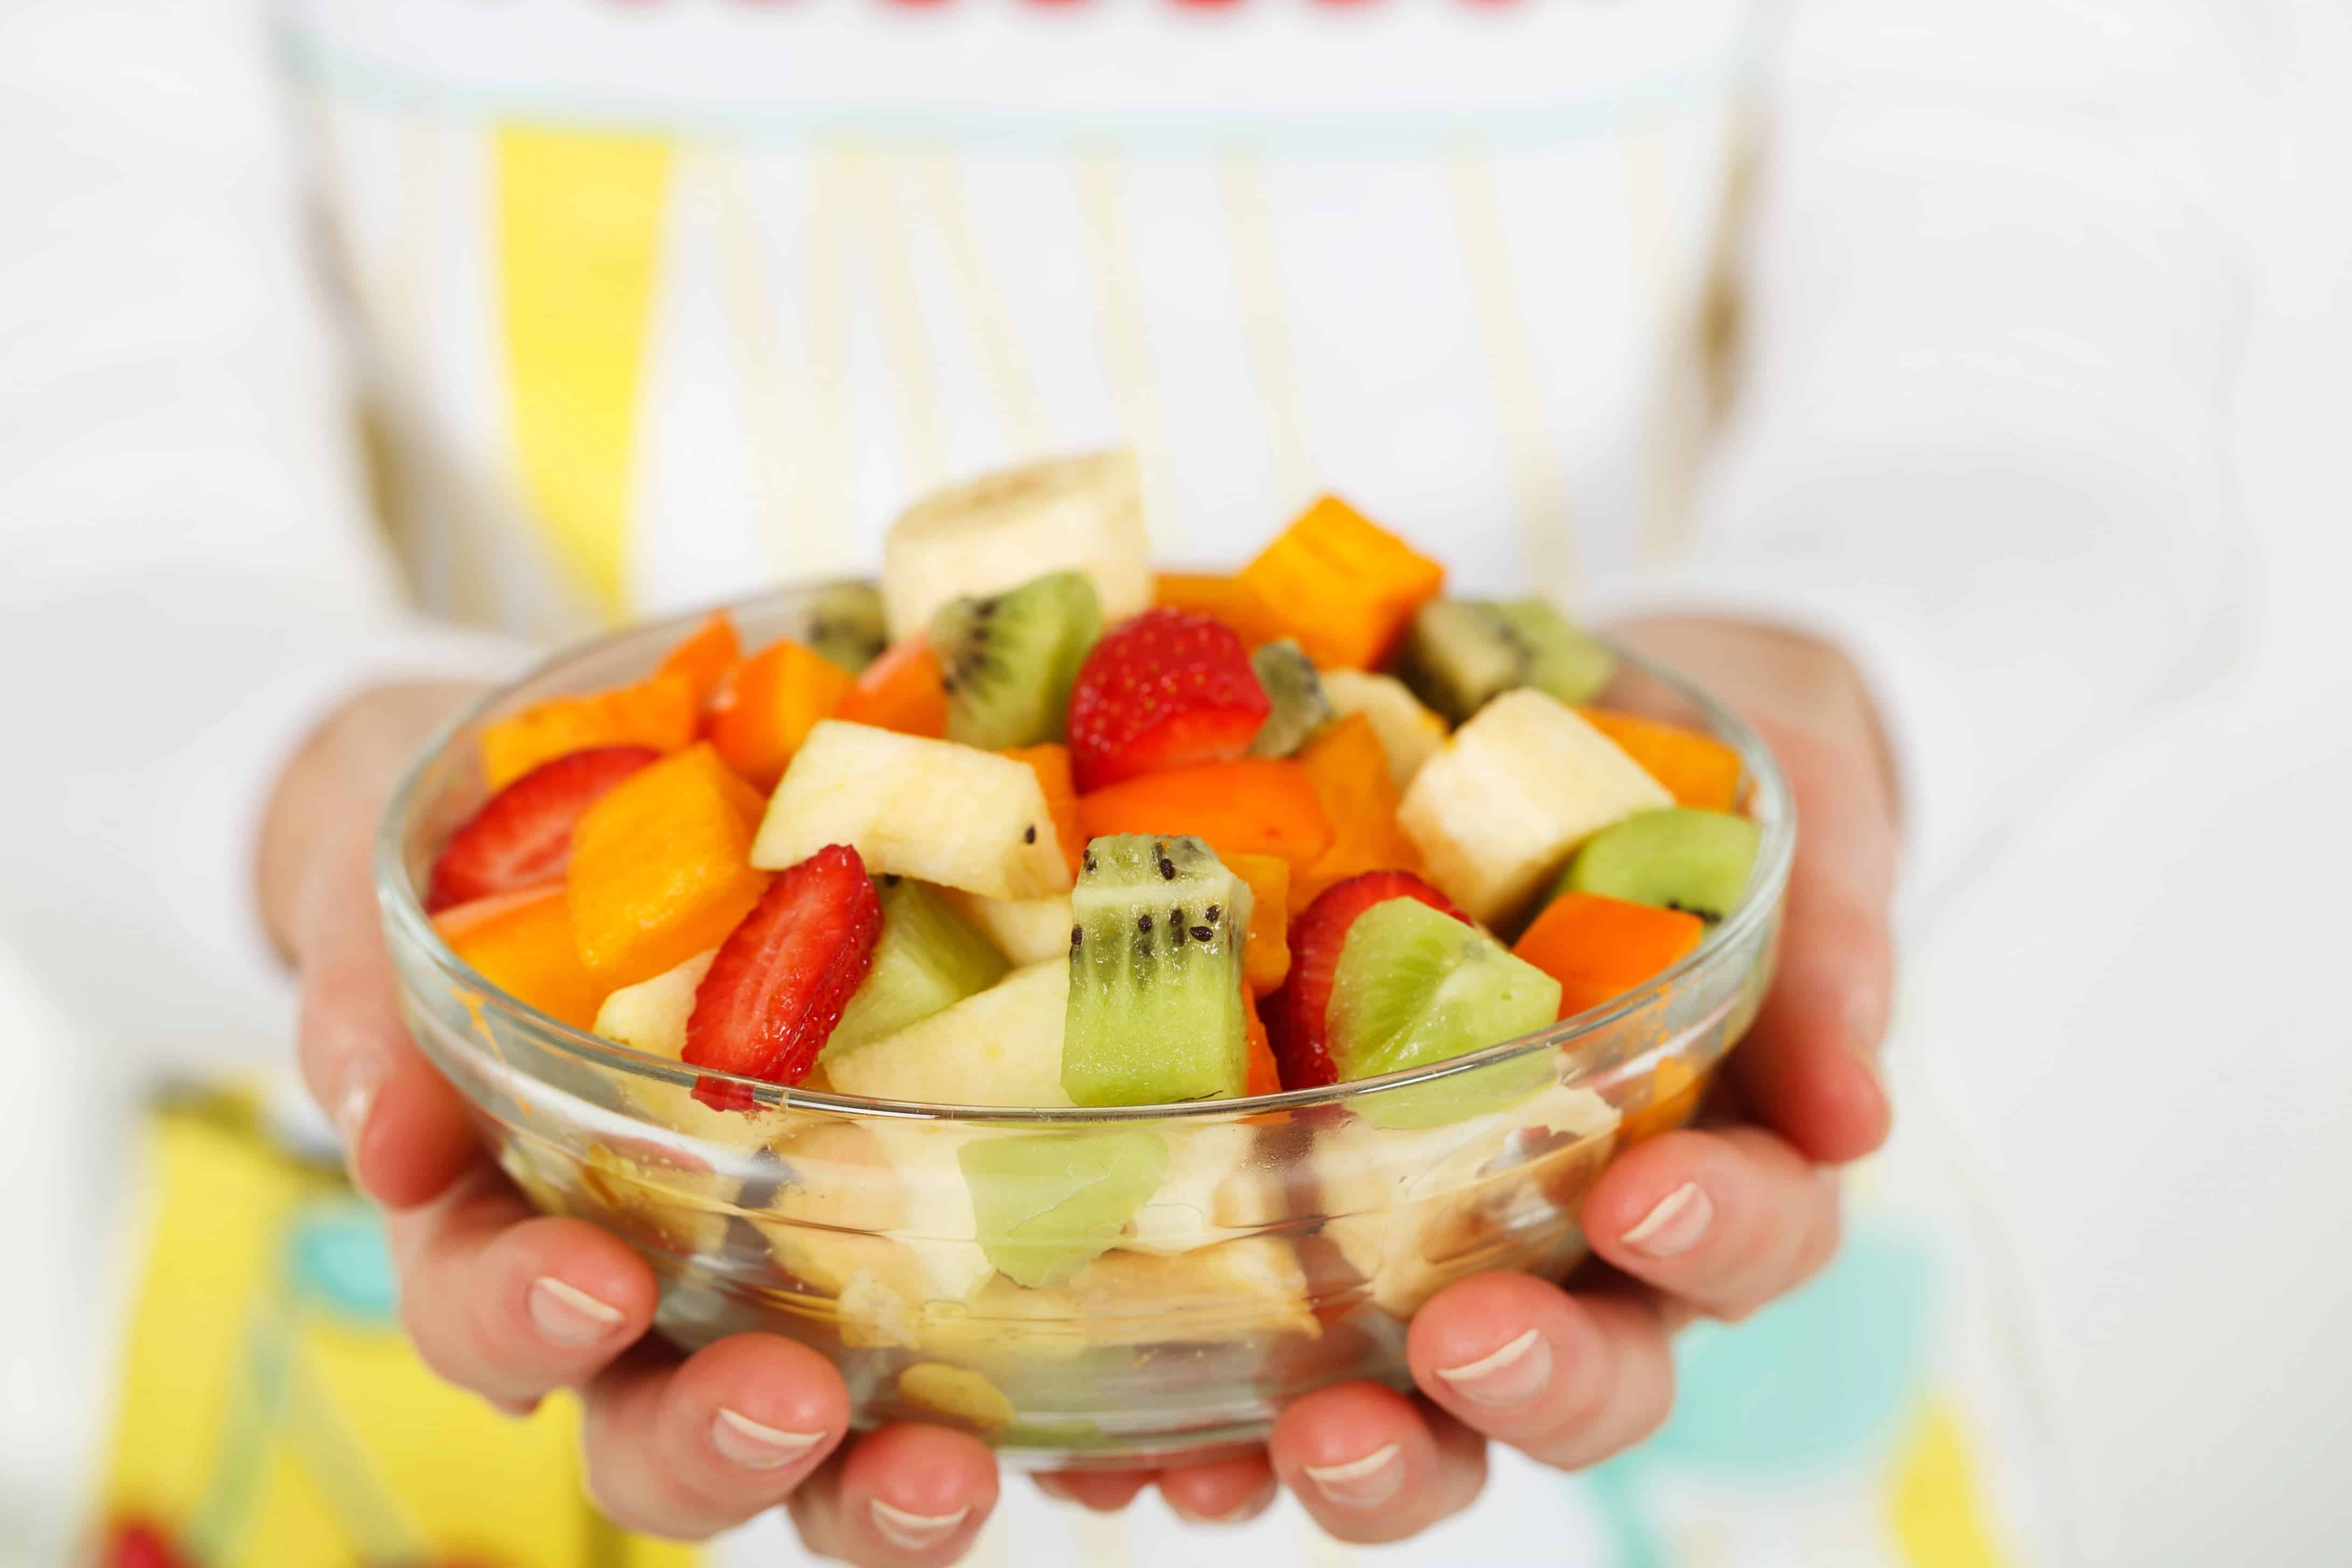 Hands holding bowl of chopped fruit